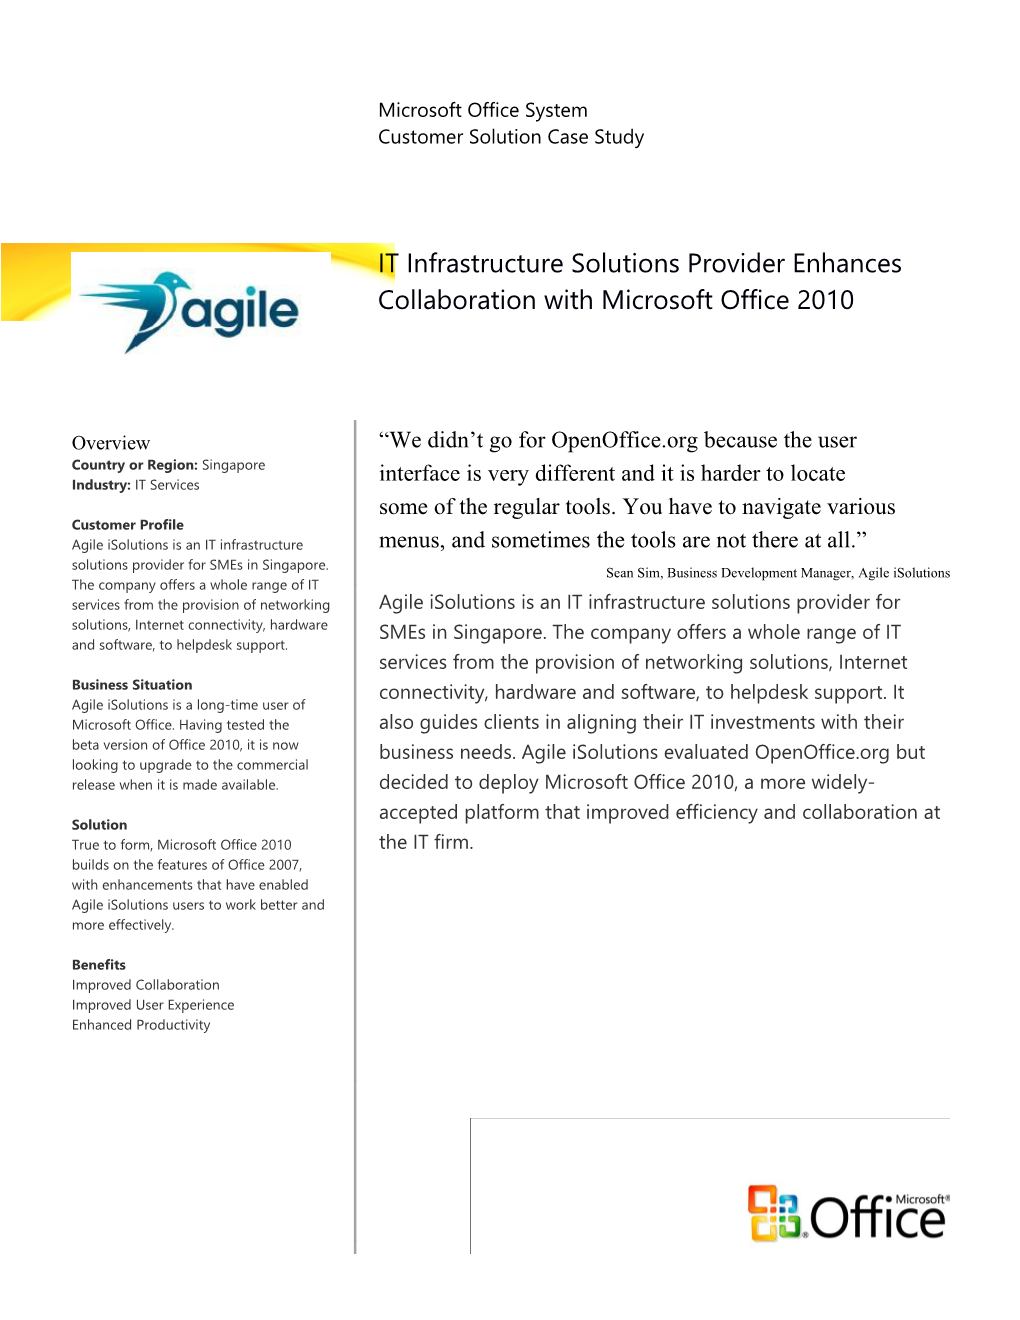 Metia CEP IT Infrastructure Solutions Provider Enhances X000d Collaboration with Microsoft